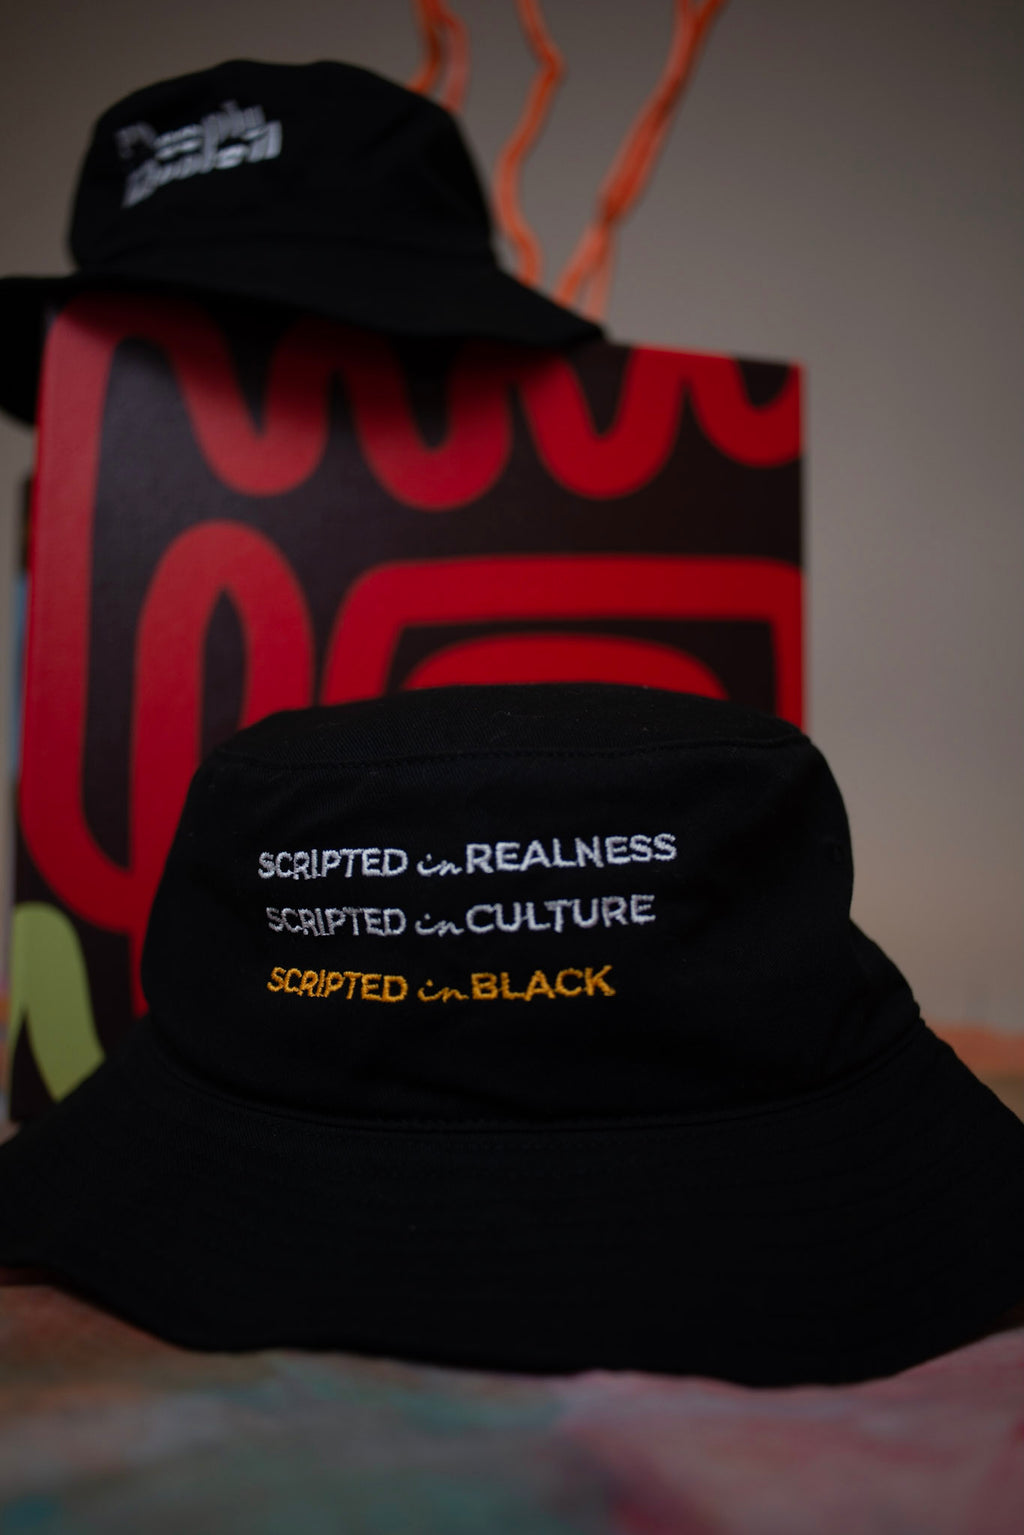 Deeply Rooted Bucket Hat | BLACK